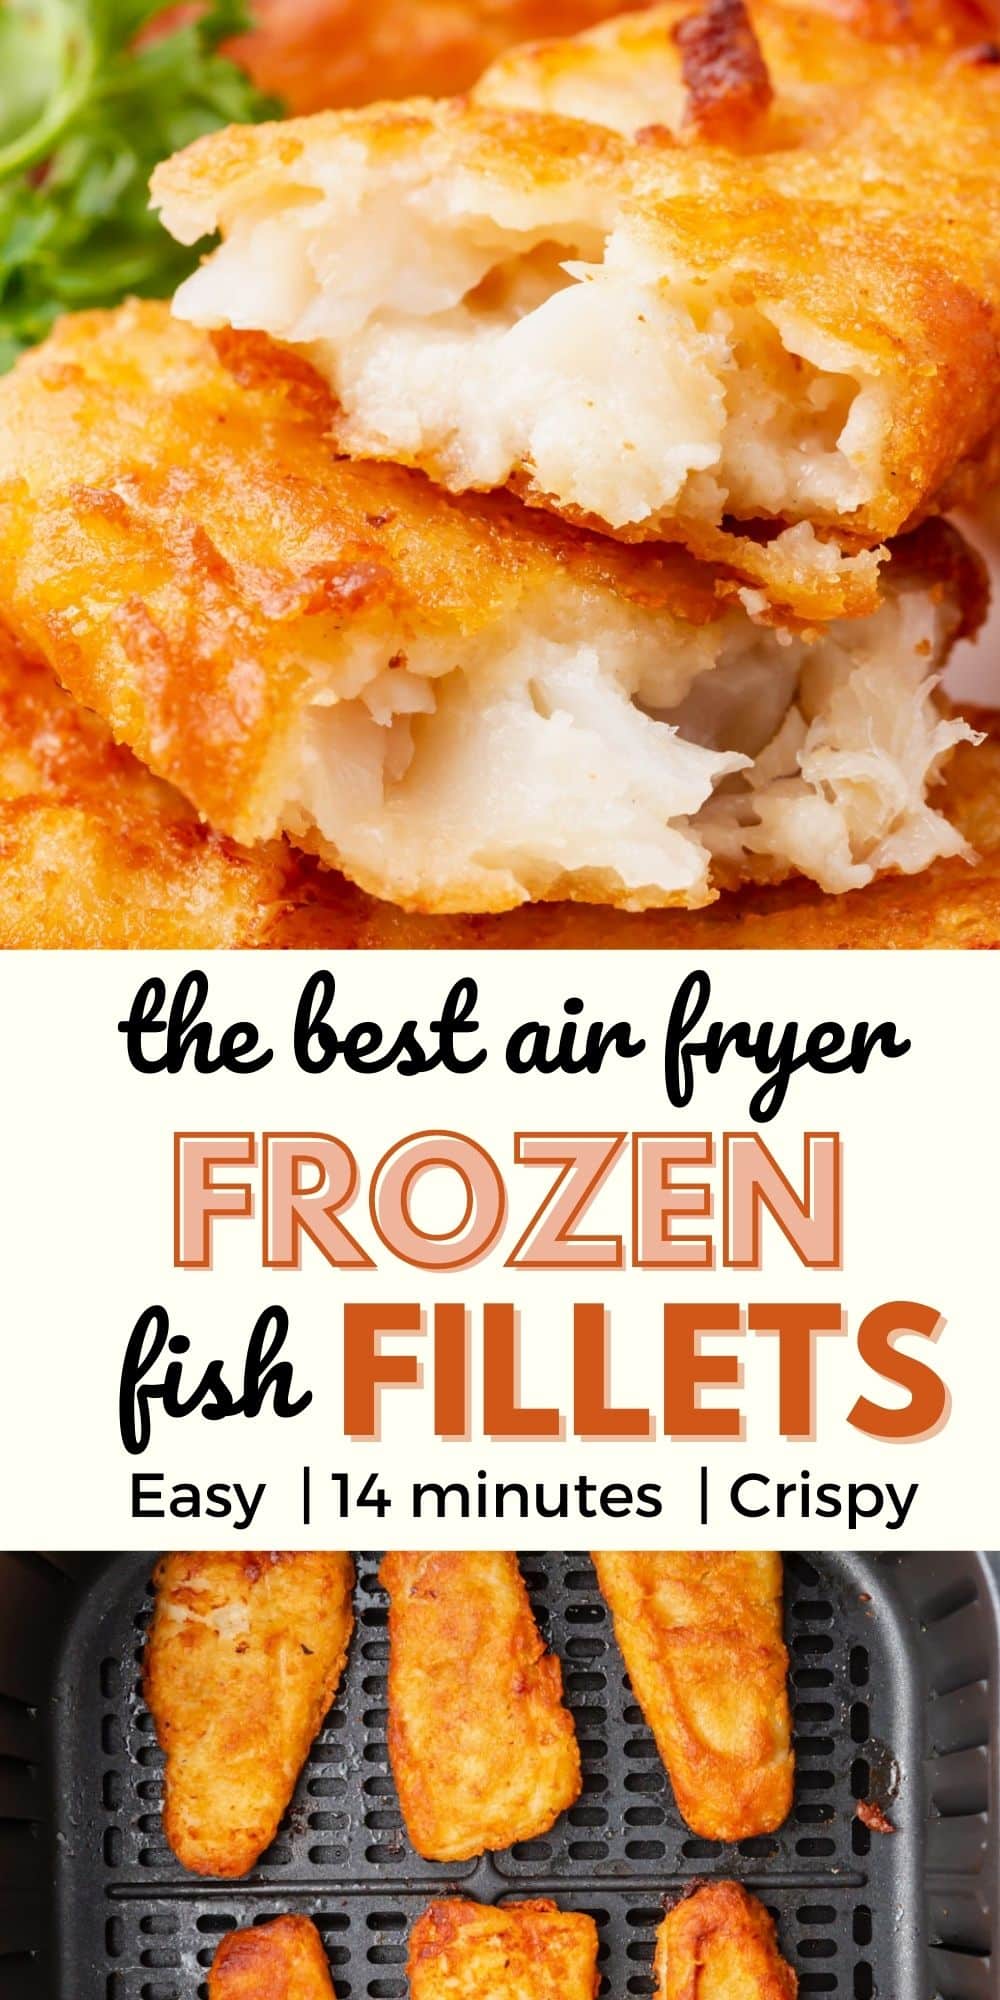 You won't believe how simple it is to make Air Fryer Frozen Fish Fillets! Frozen fish fillets are golden brown, crispy, and ready for dinner in just a few minutes in the air fryer! via @vegetarianmamma